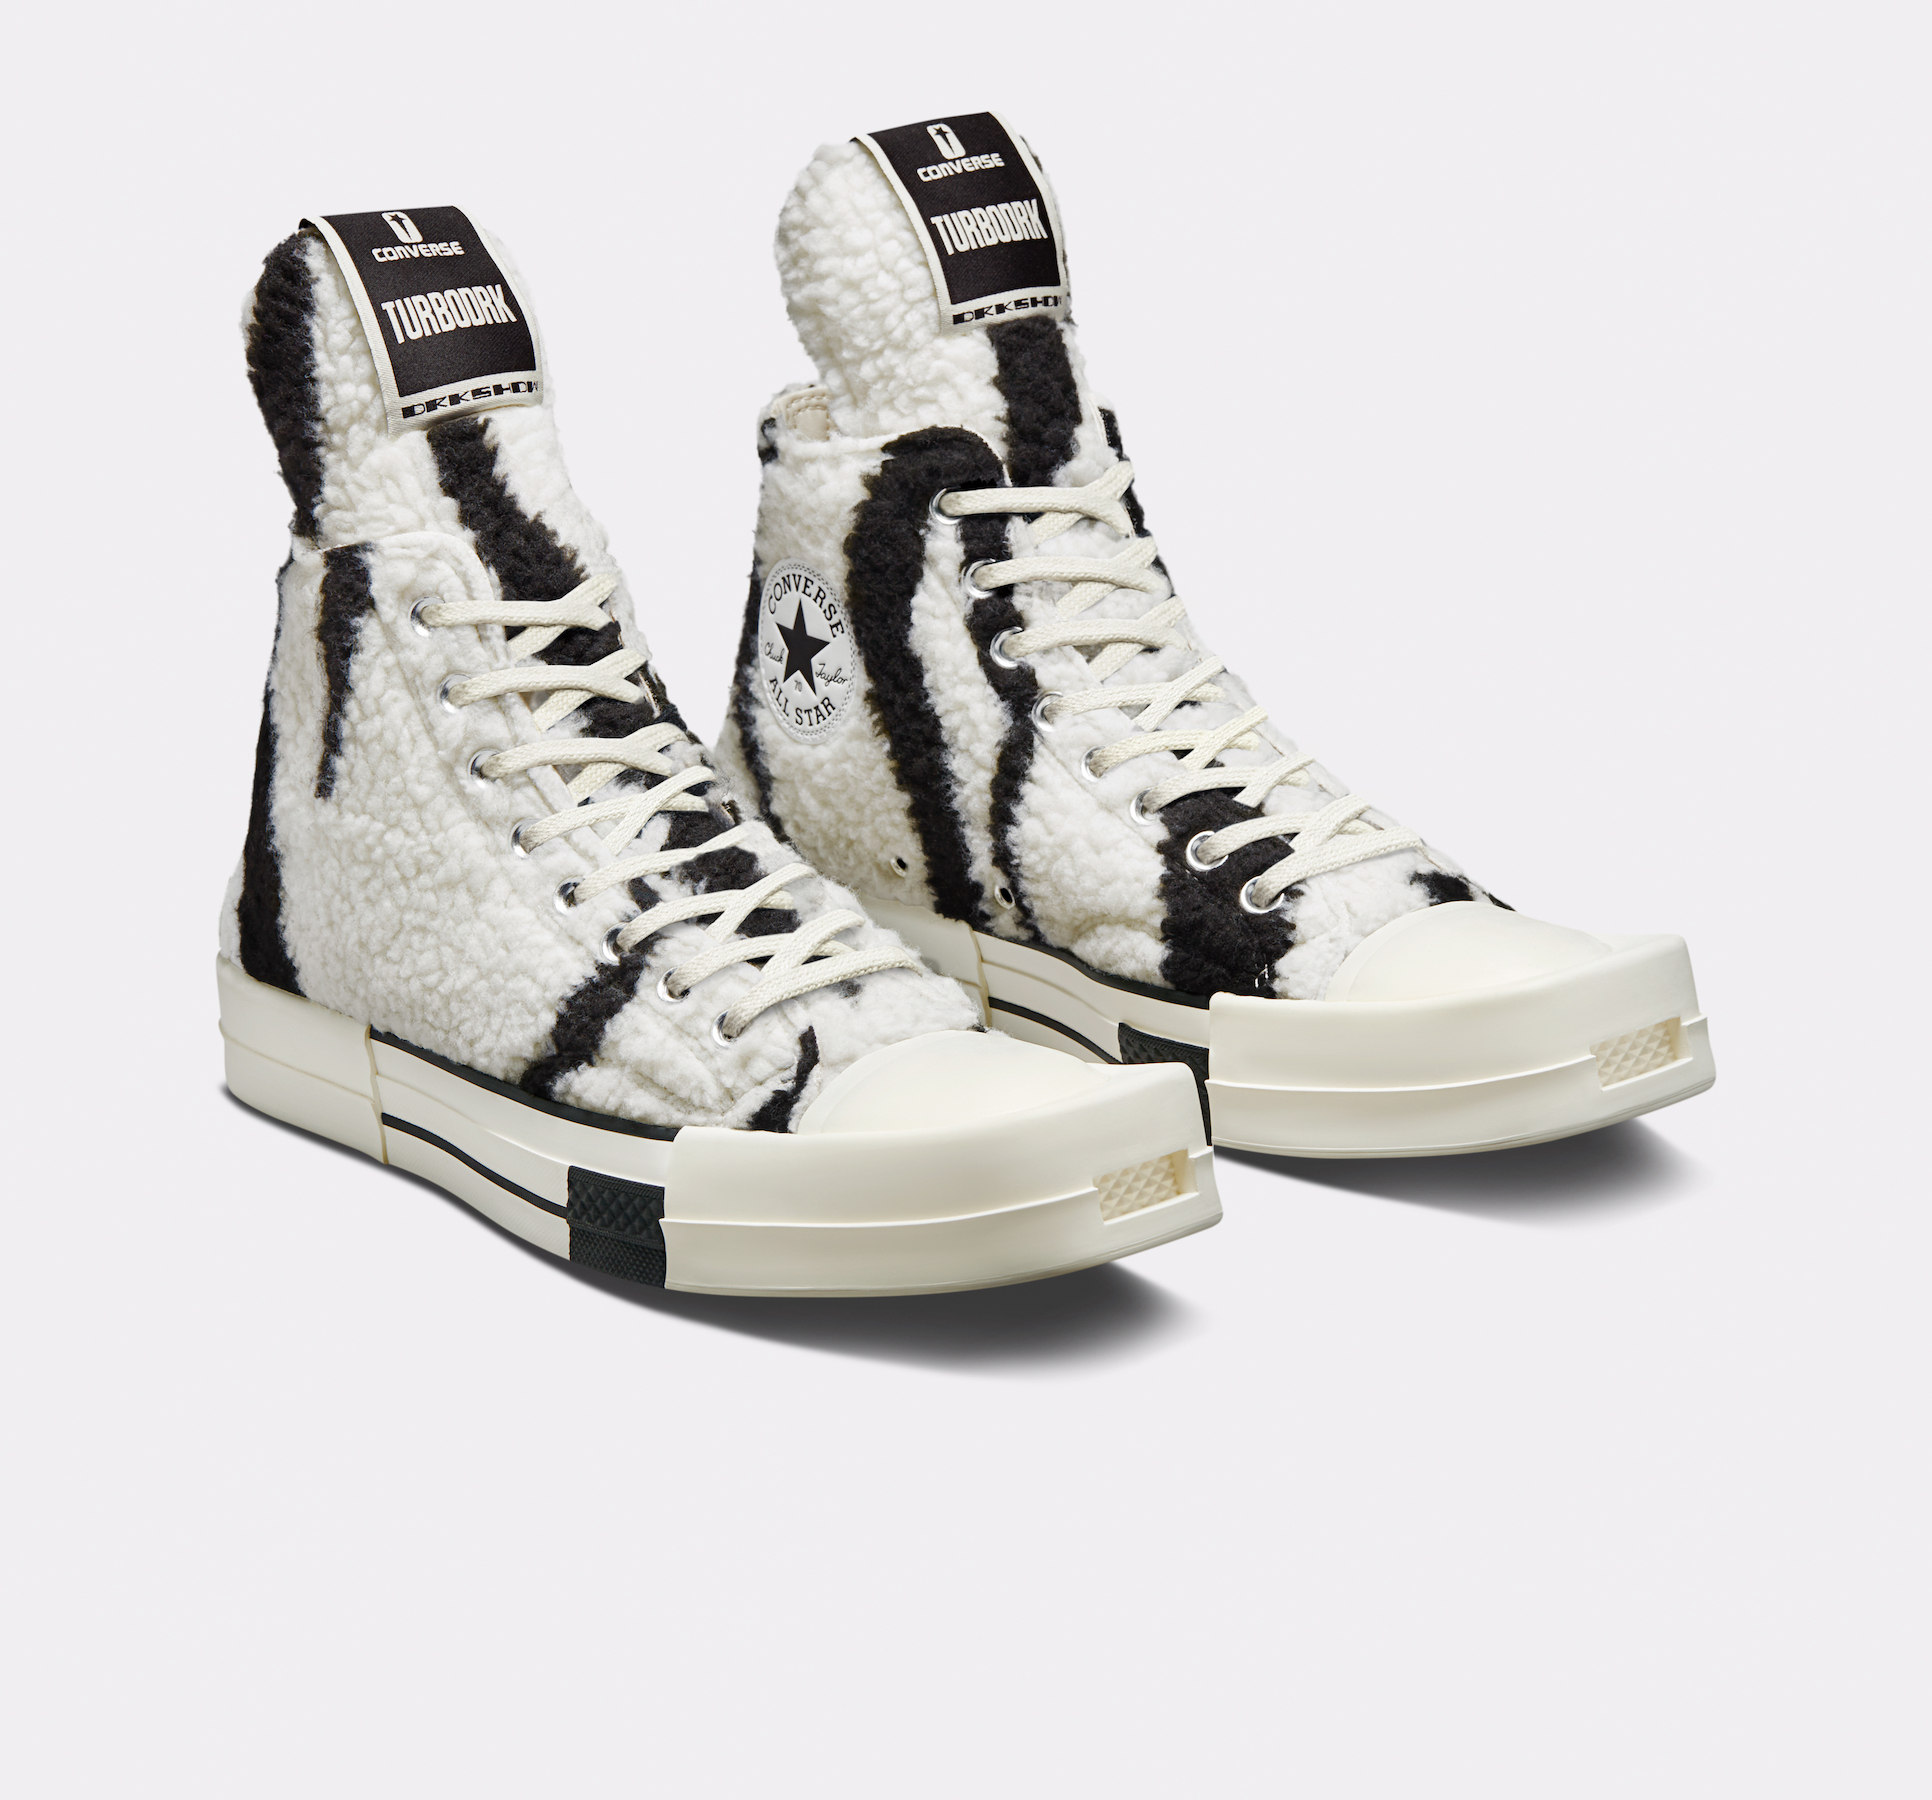 Converse and Rick Owens Releases TURBODRK Chuck 70 + Restock of ...